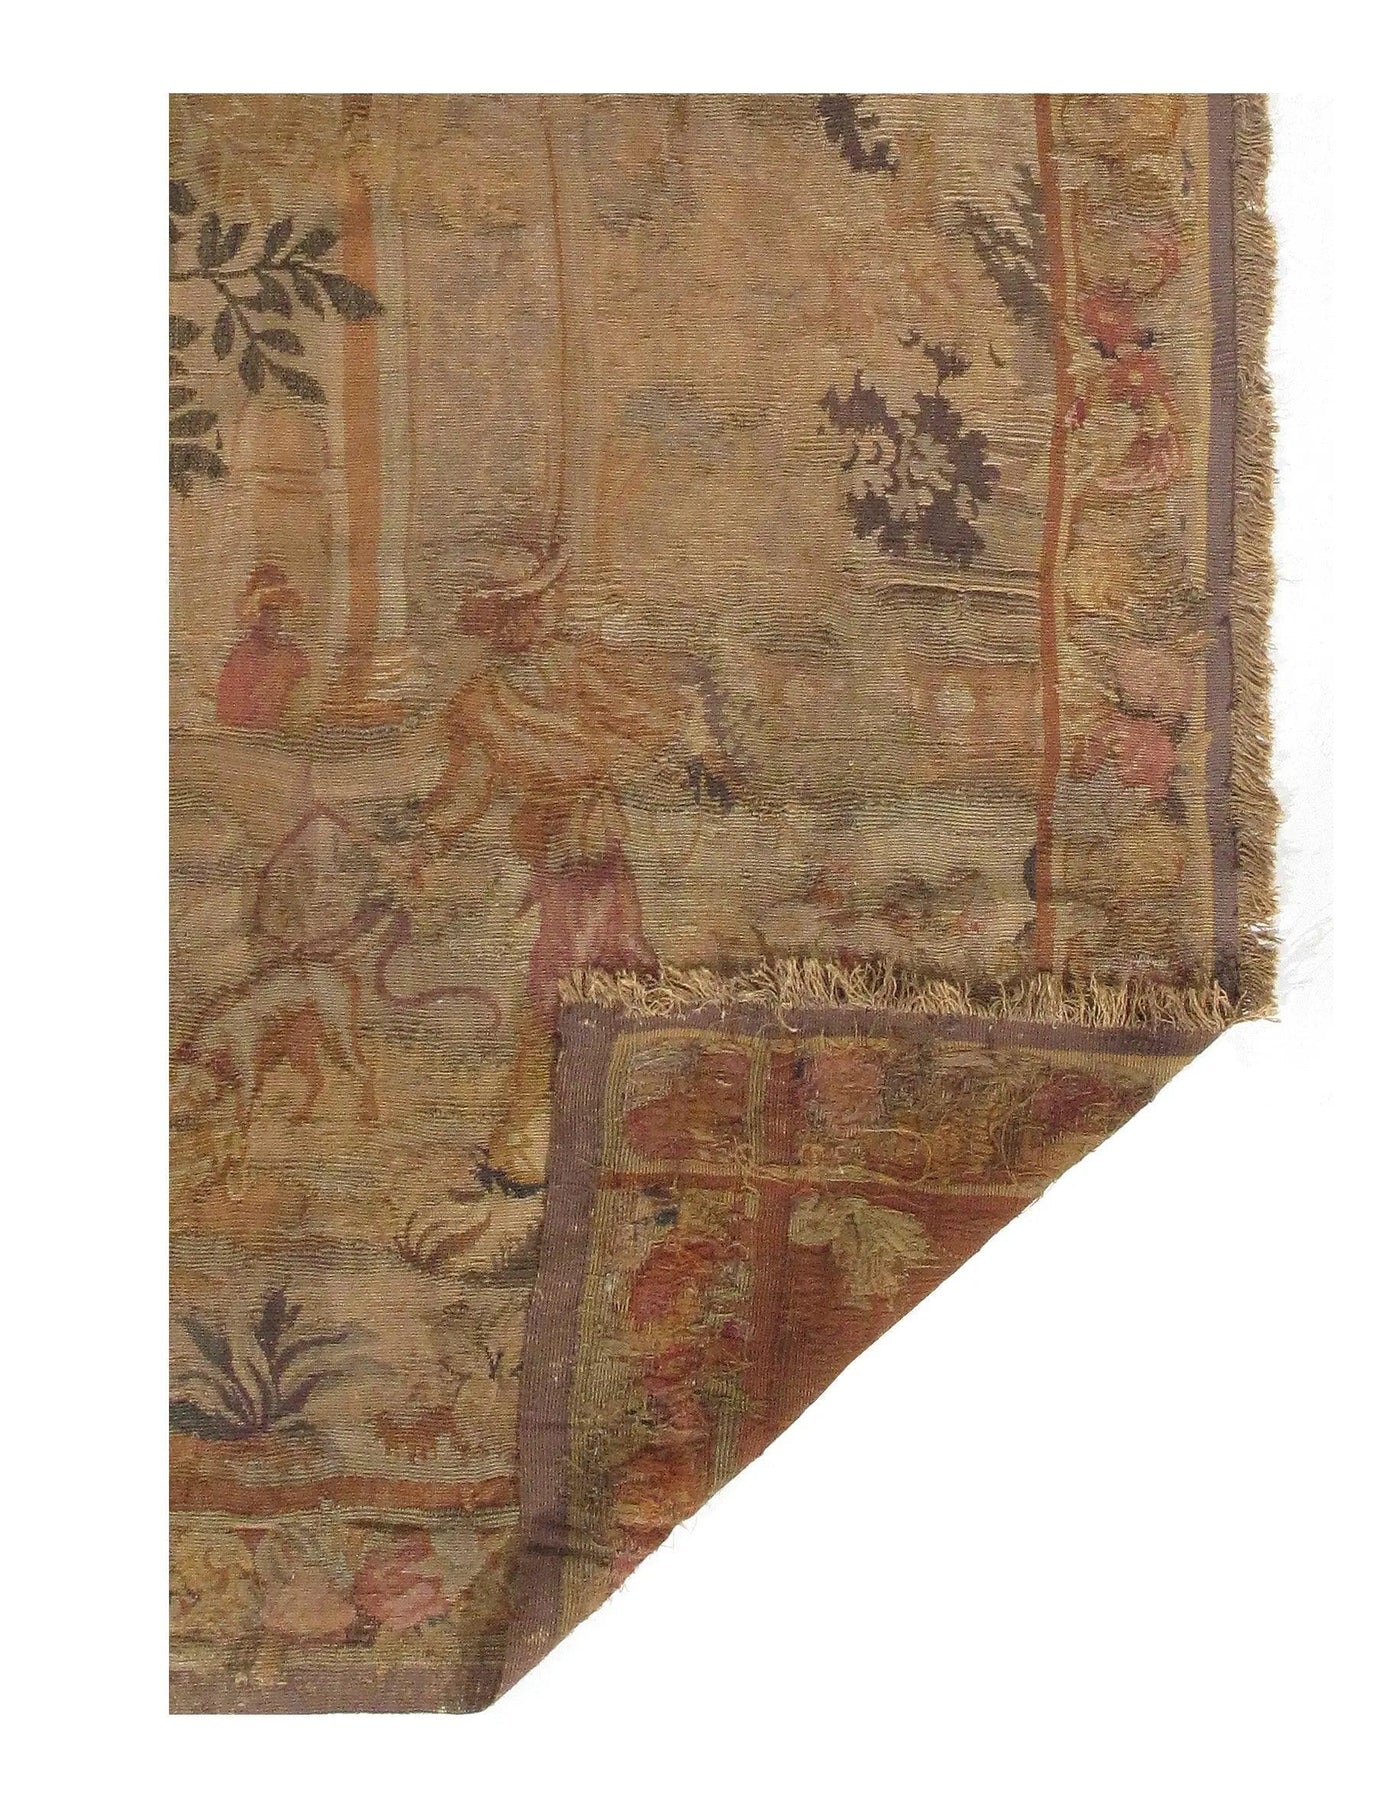 Light Brown France Tapestry - 4'3'' X 6'11''